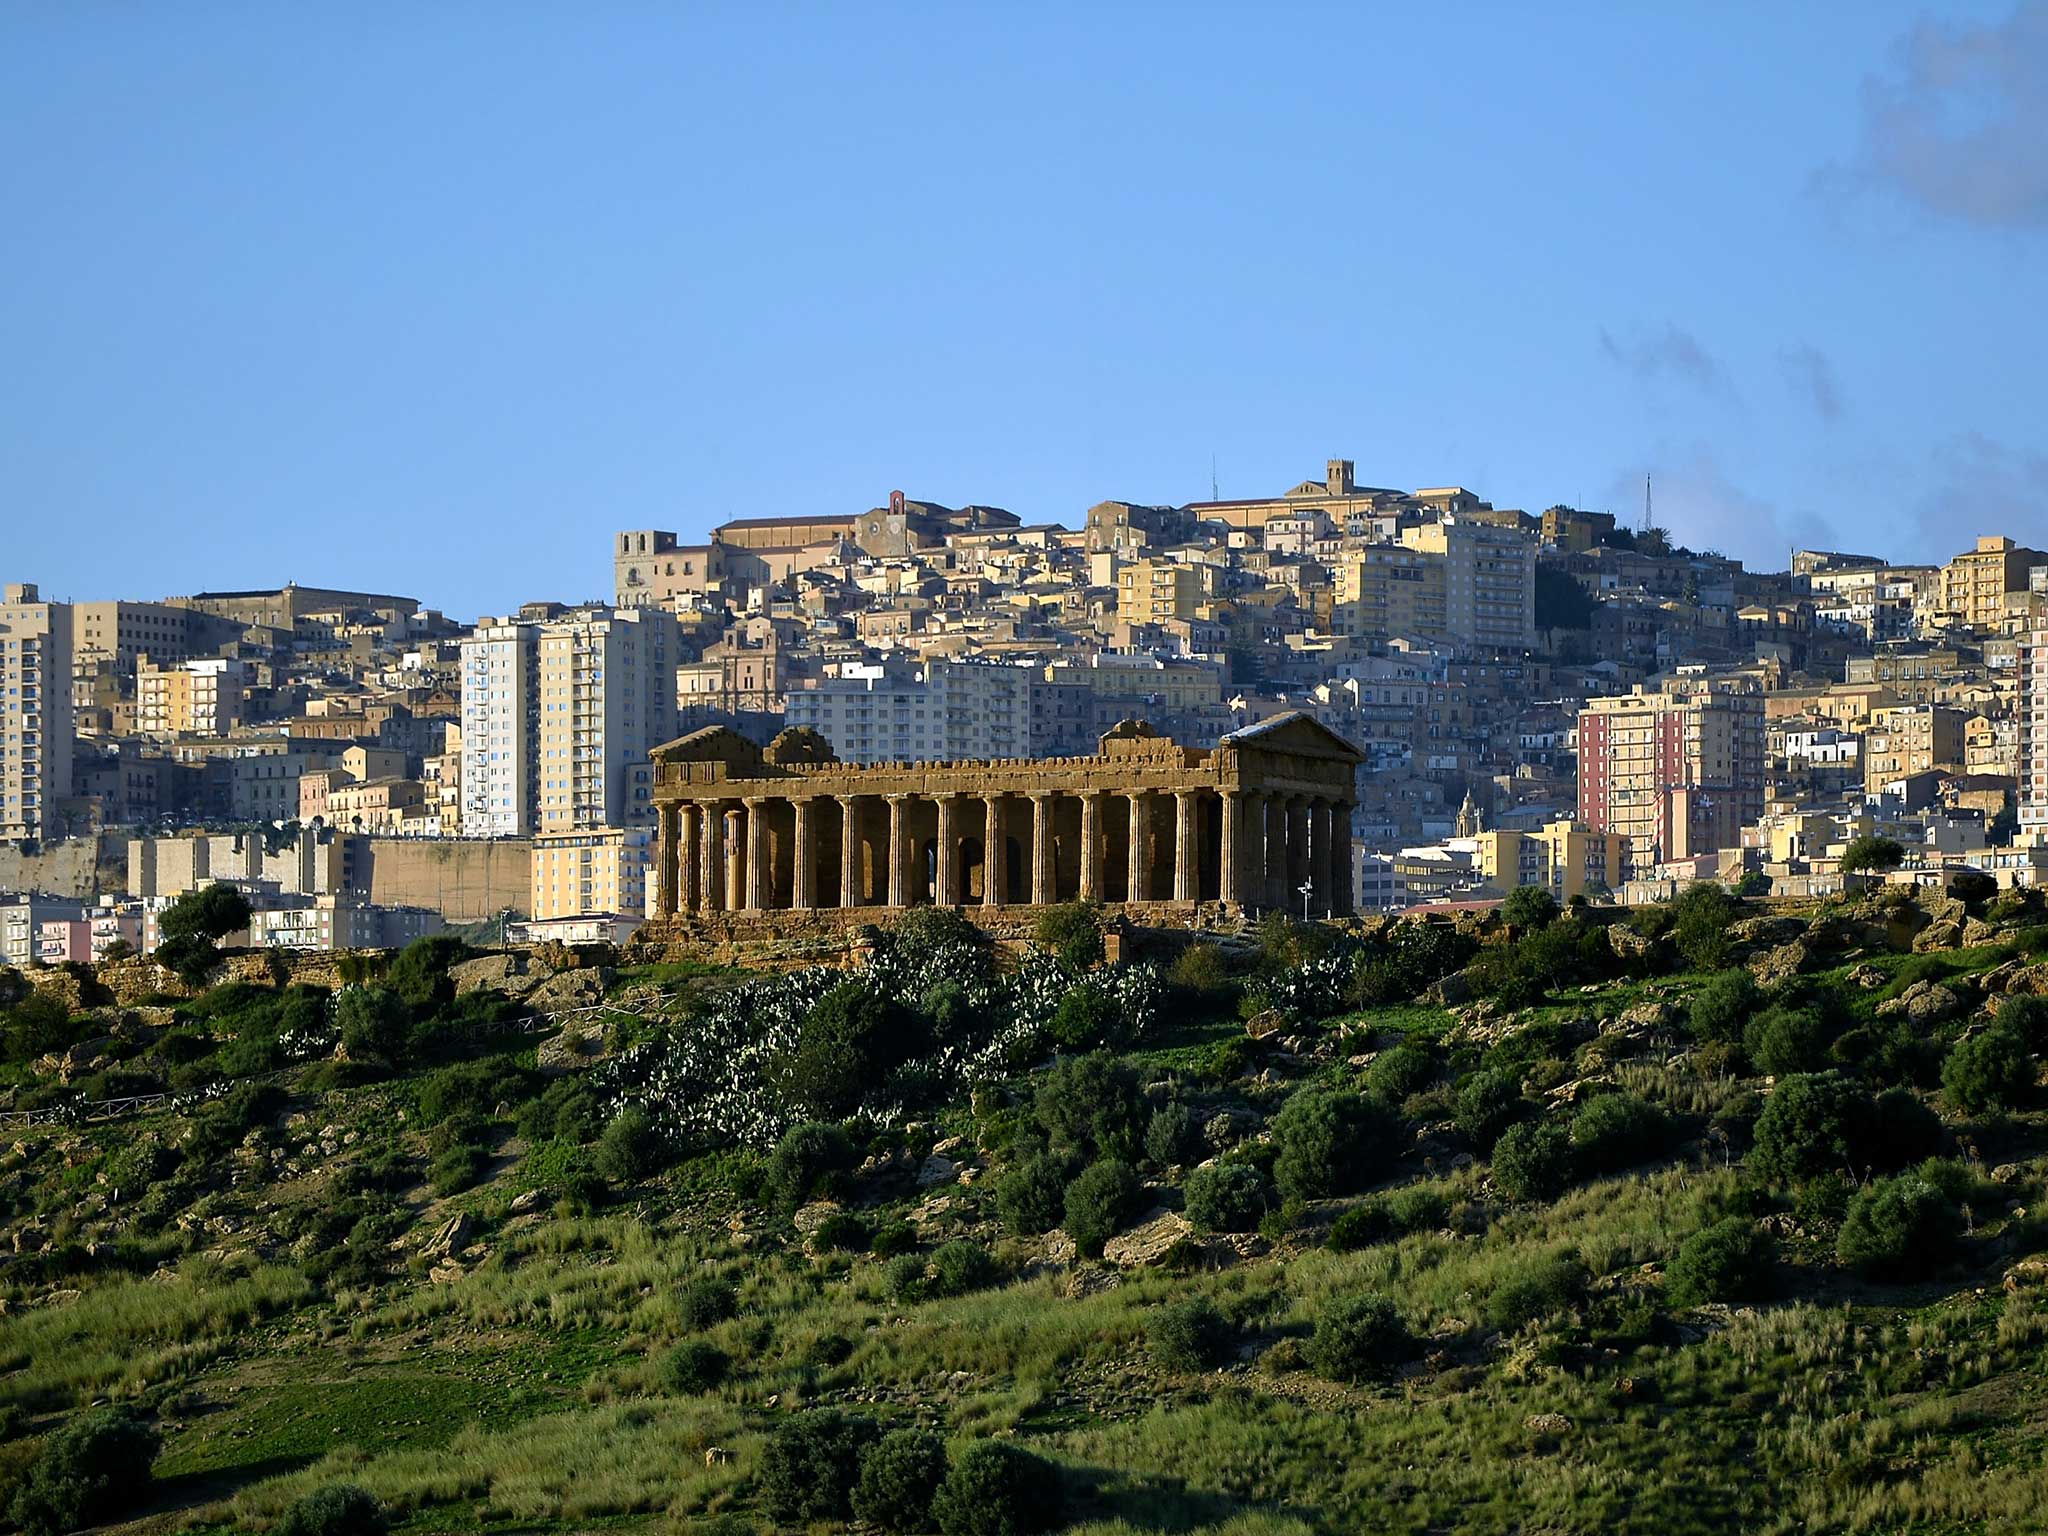 The plight of Agrigento appears to encapsulate the graft that has stifled Italy’s economy